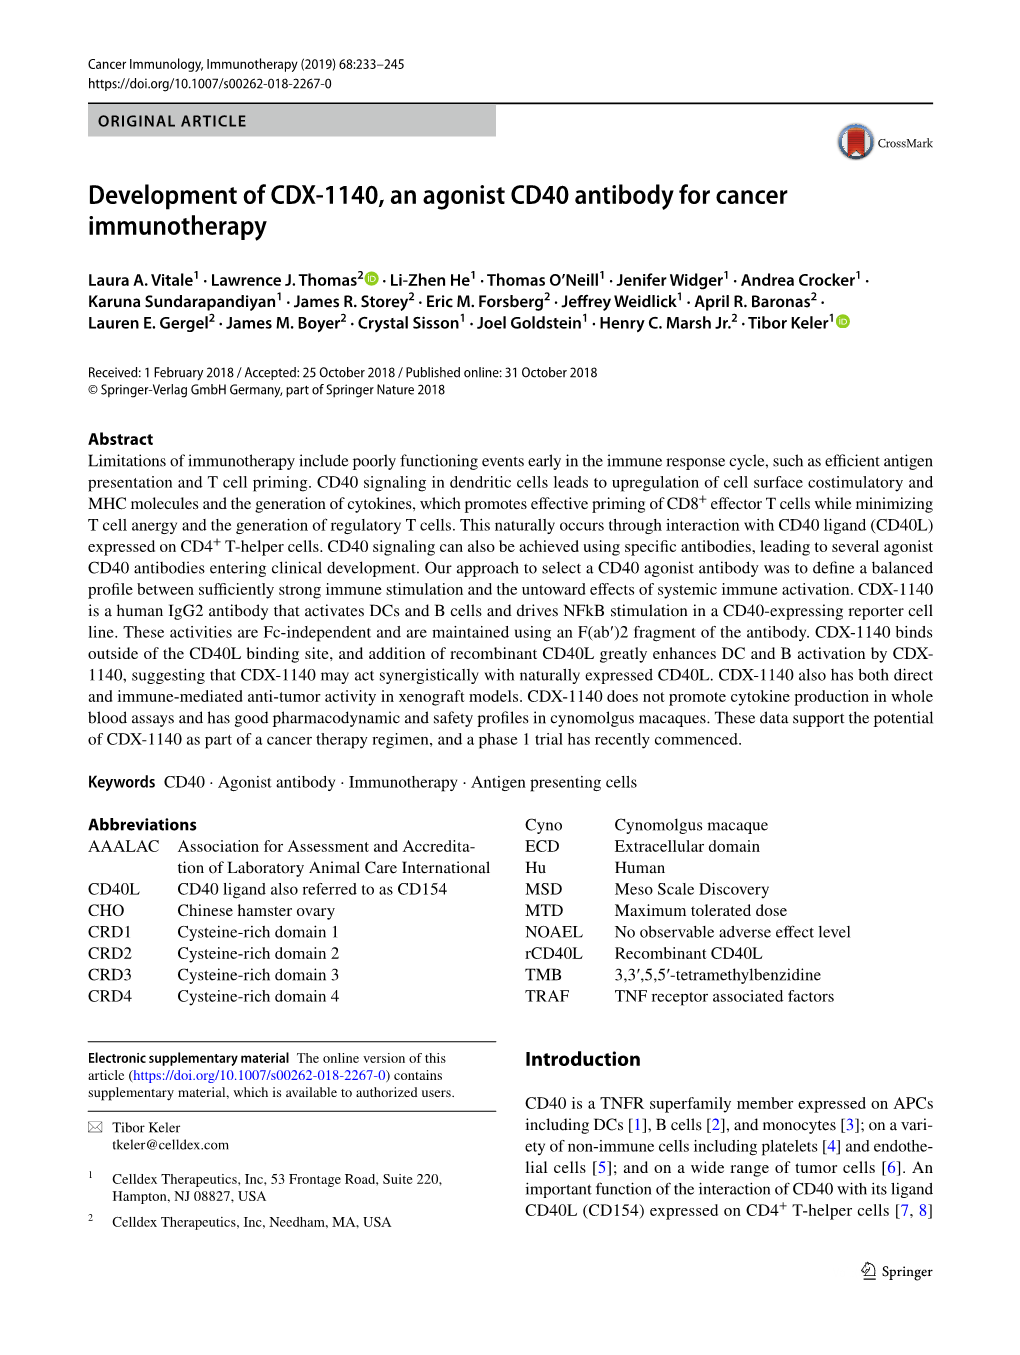 Development of CDX-1140, an Agonist CD40 Antibody for Cancer Immunotherapy